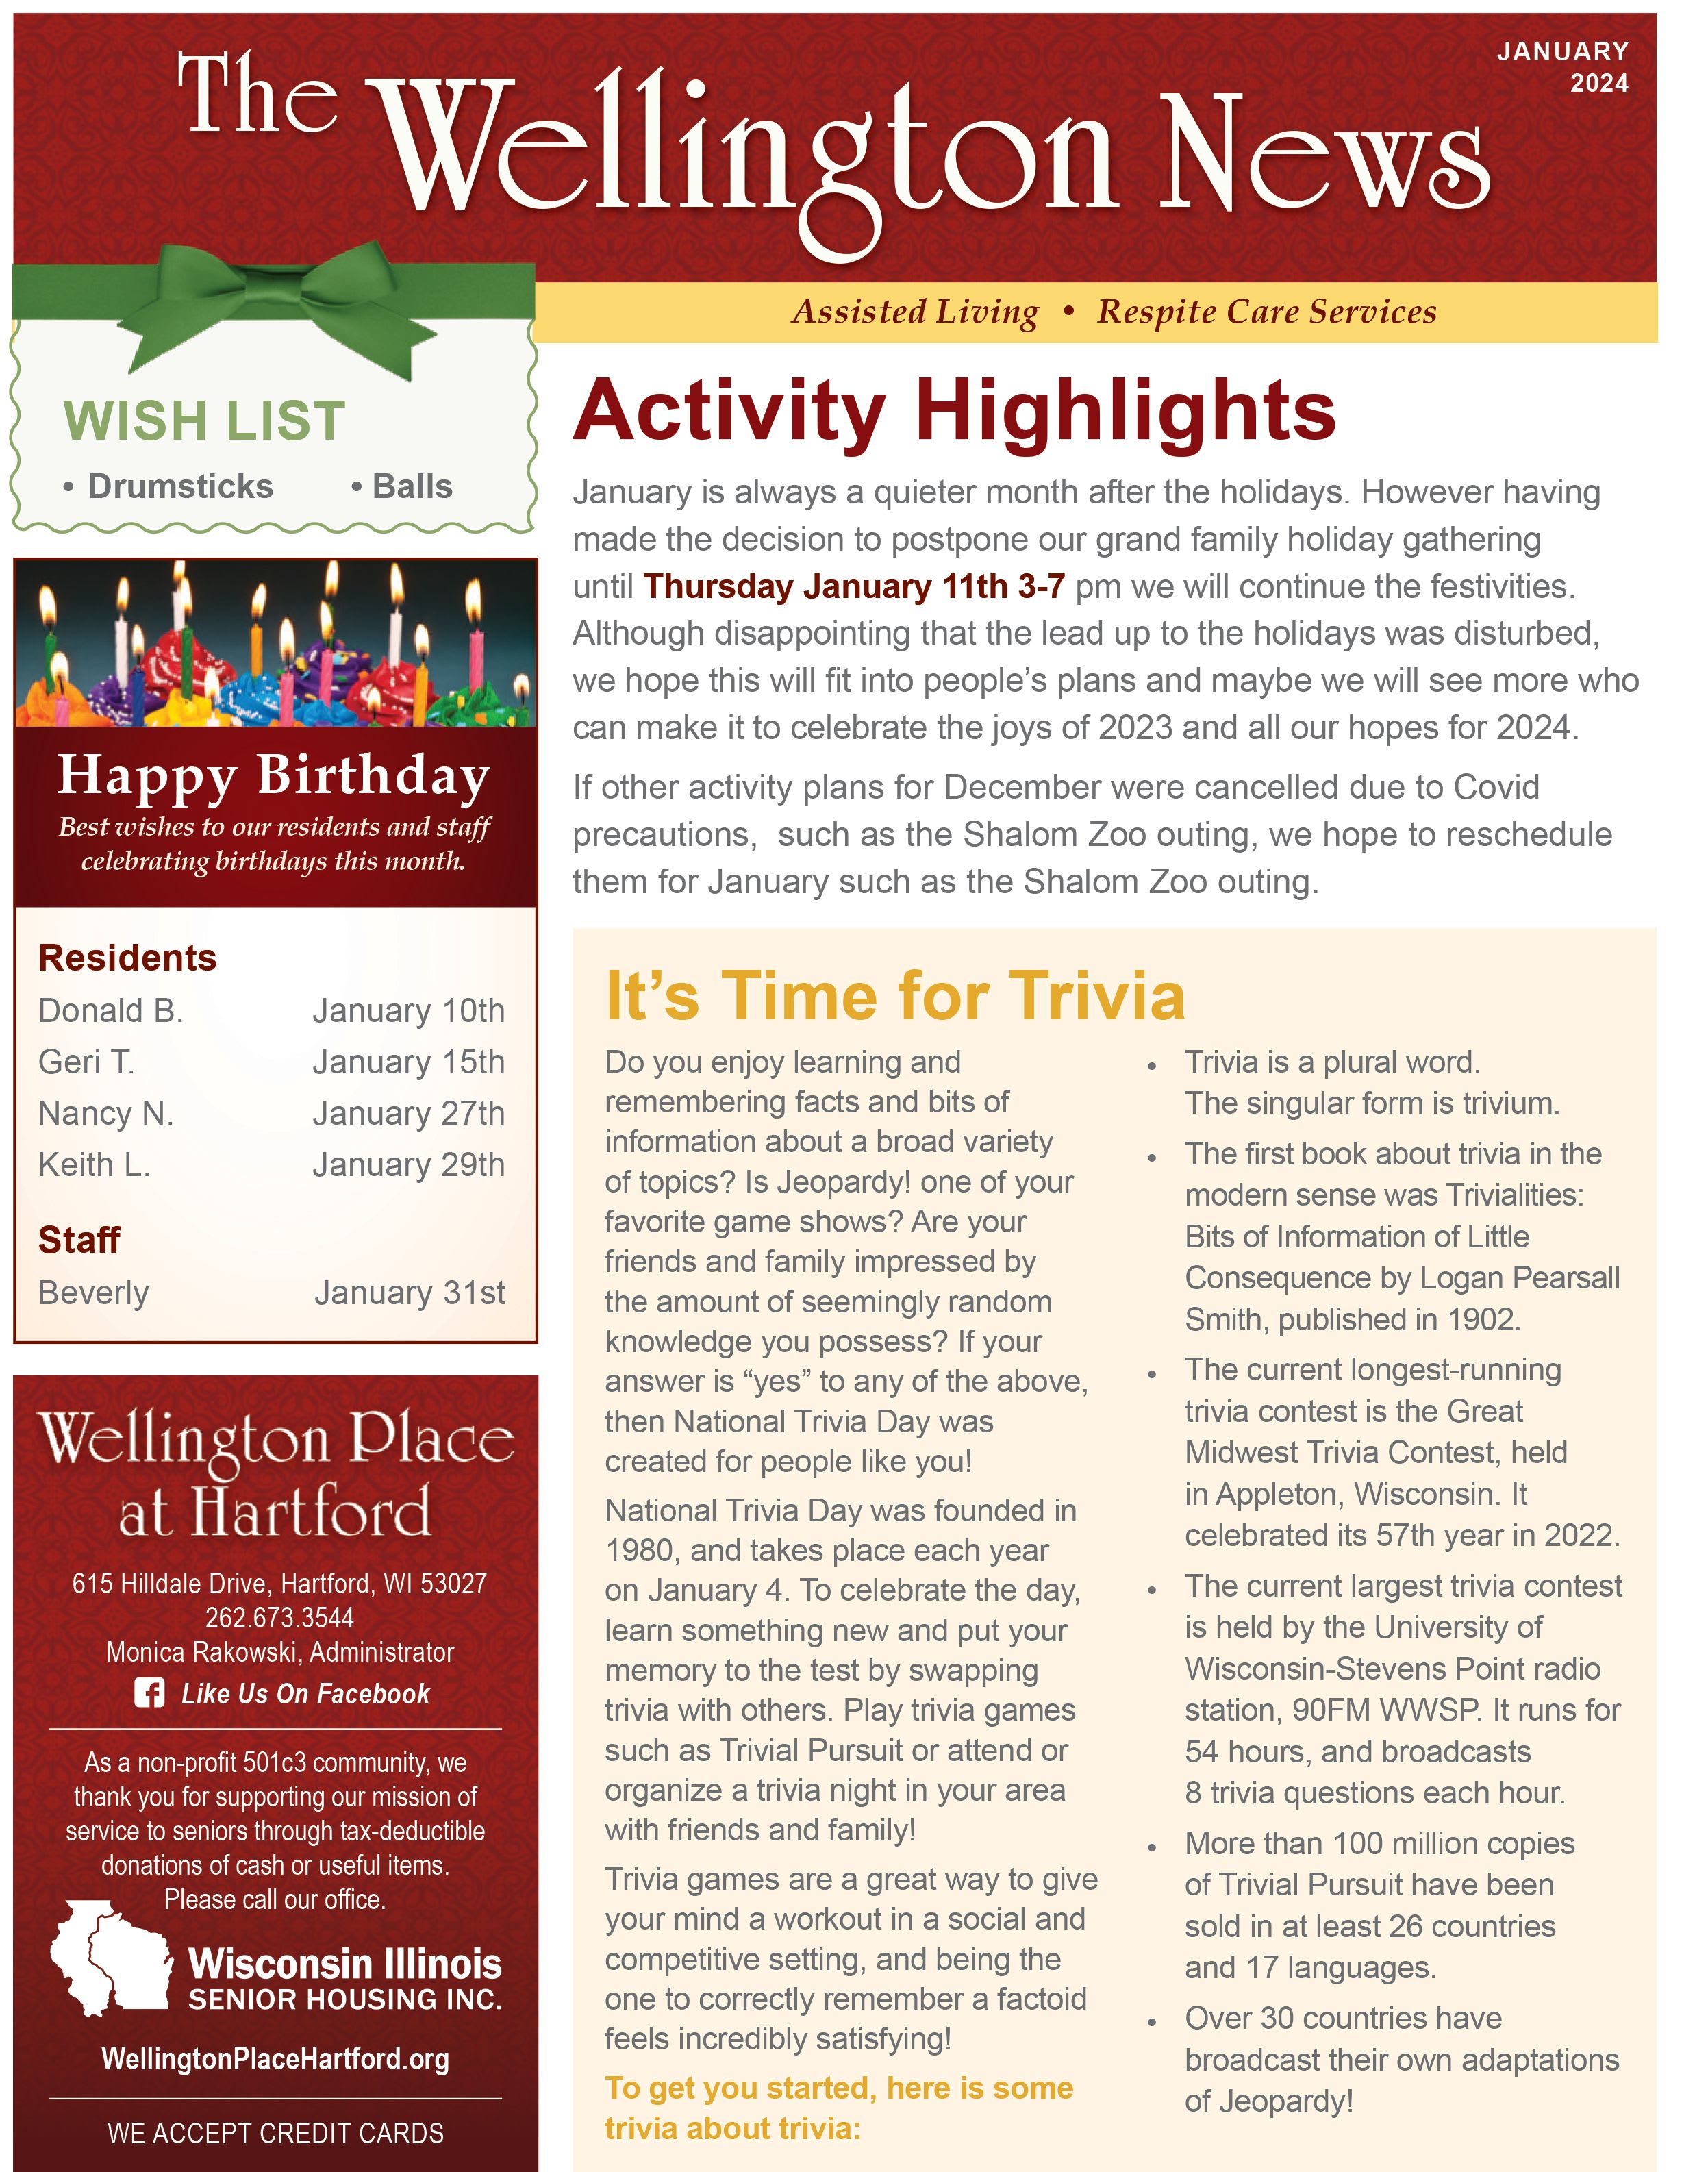 January 2024 Newsletter at Wellington Place at Hartford in Hartford, Wisconsin